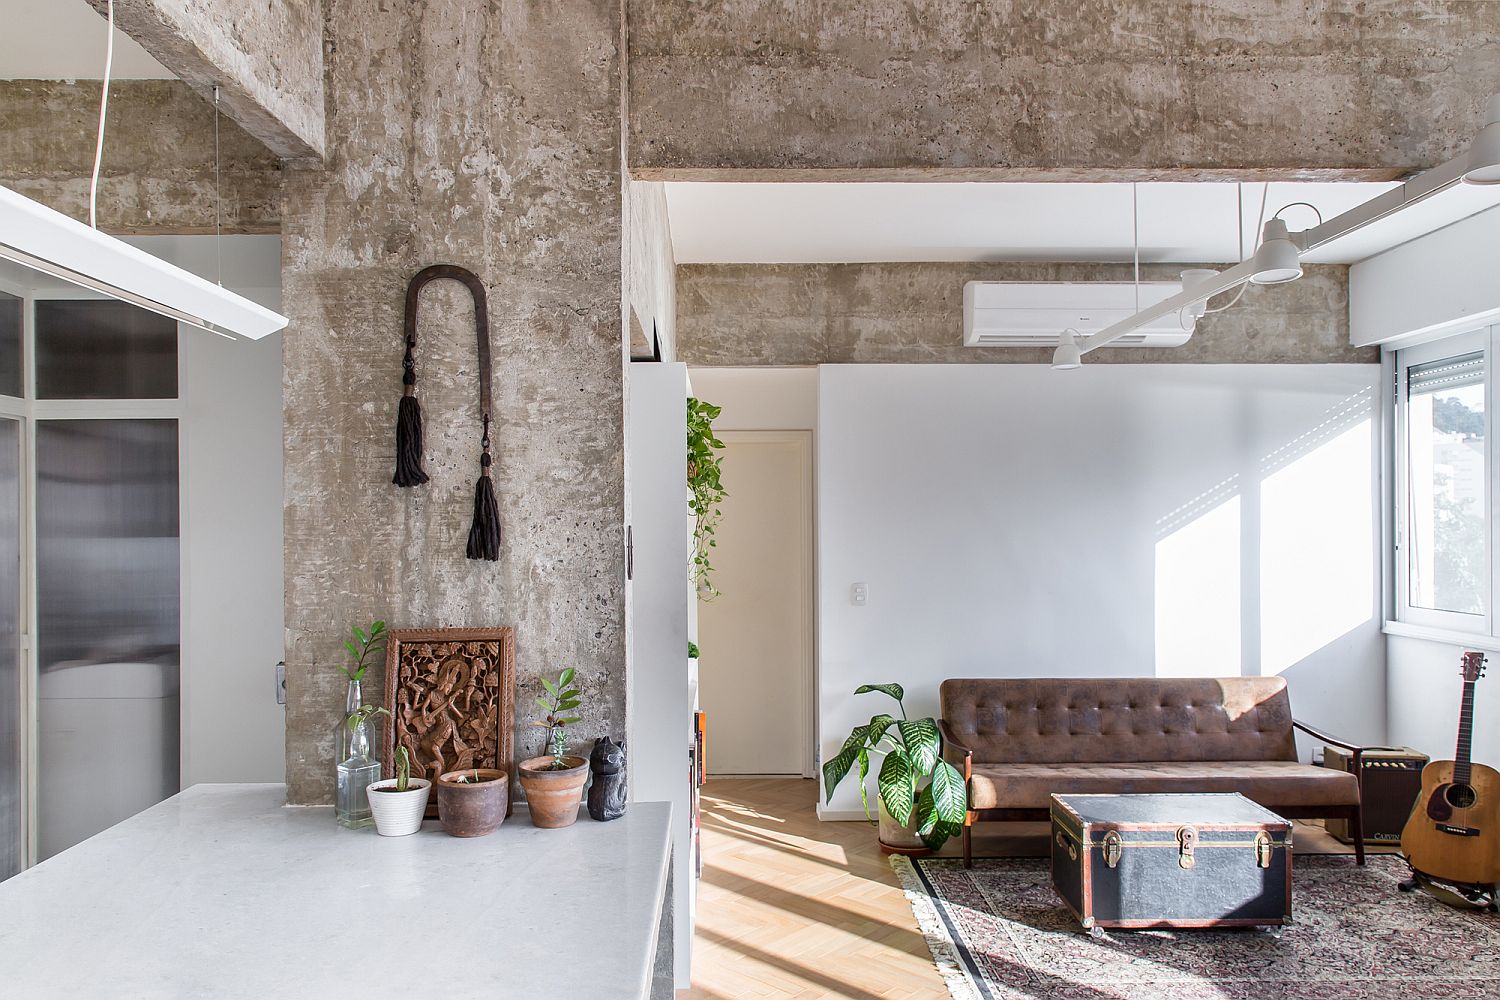 Natural light illuminates the rugged concrete living space of the apartment